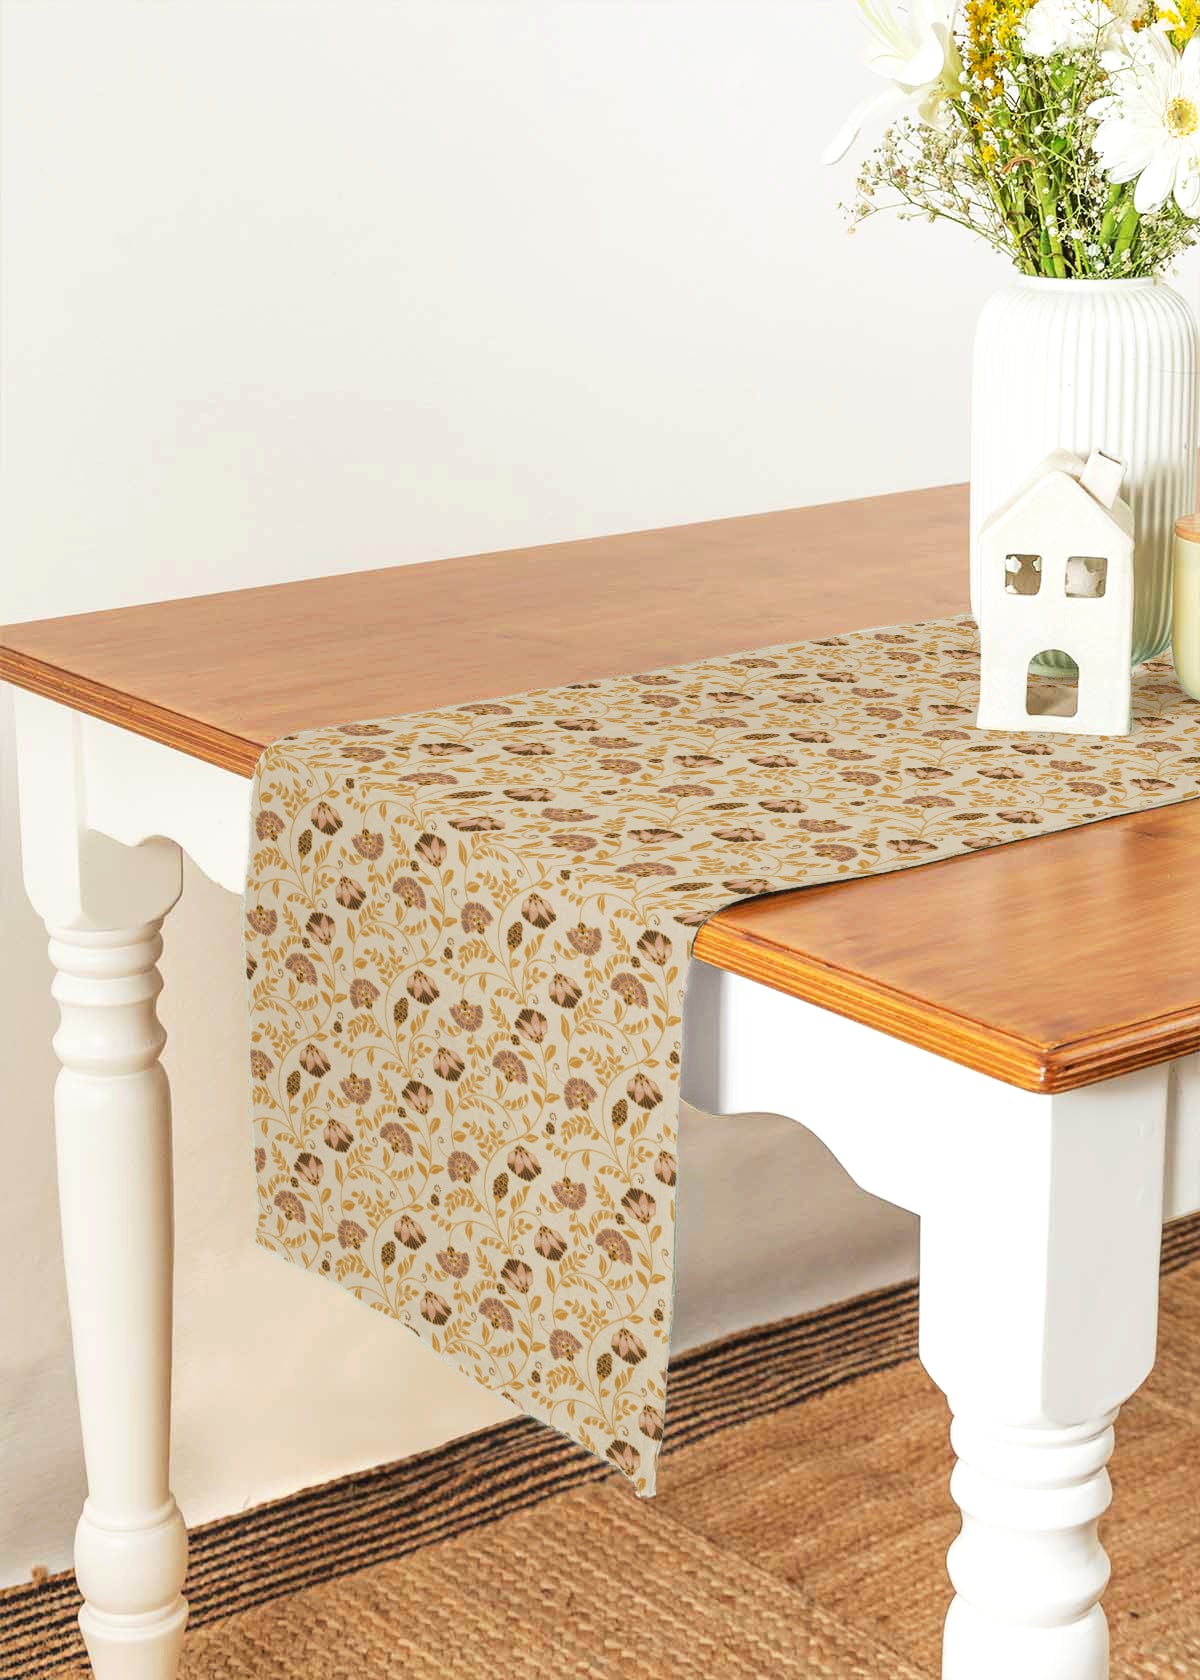 Calico Printed Cotton Table Runner - Beige